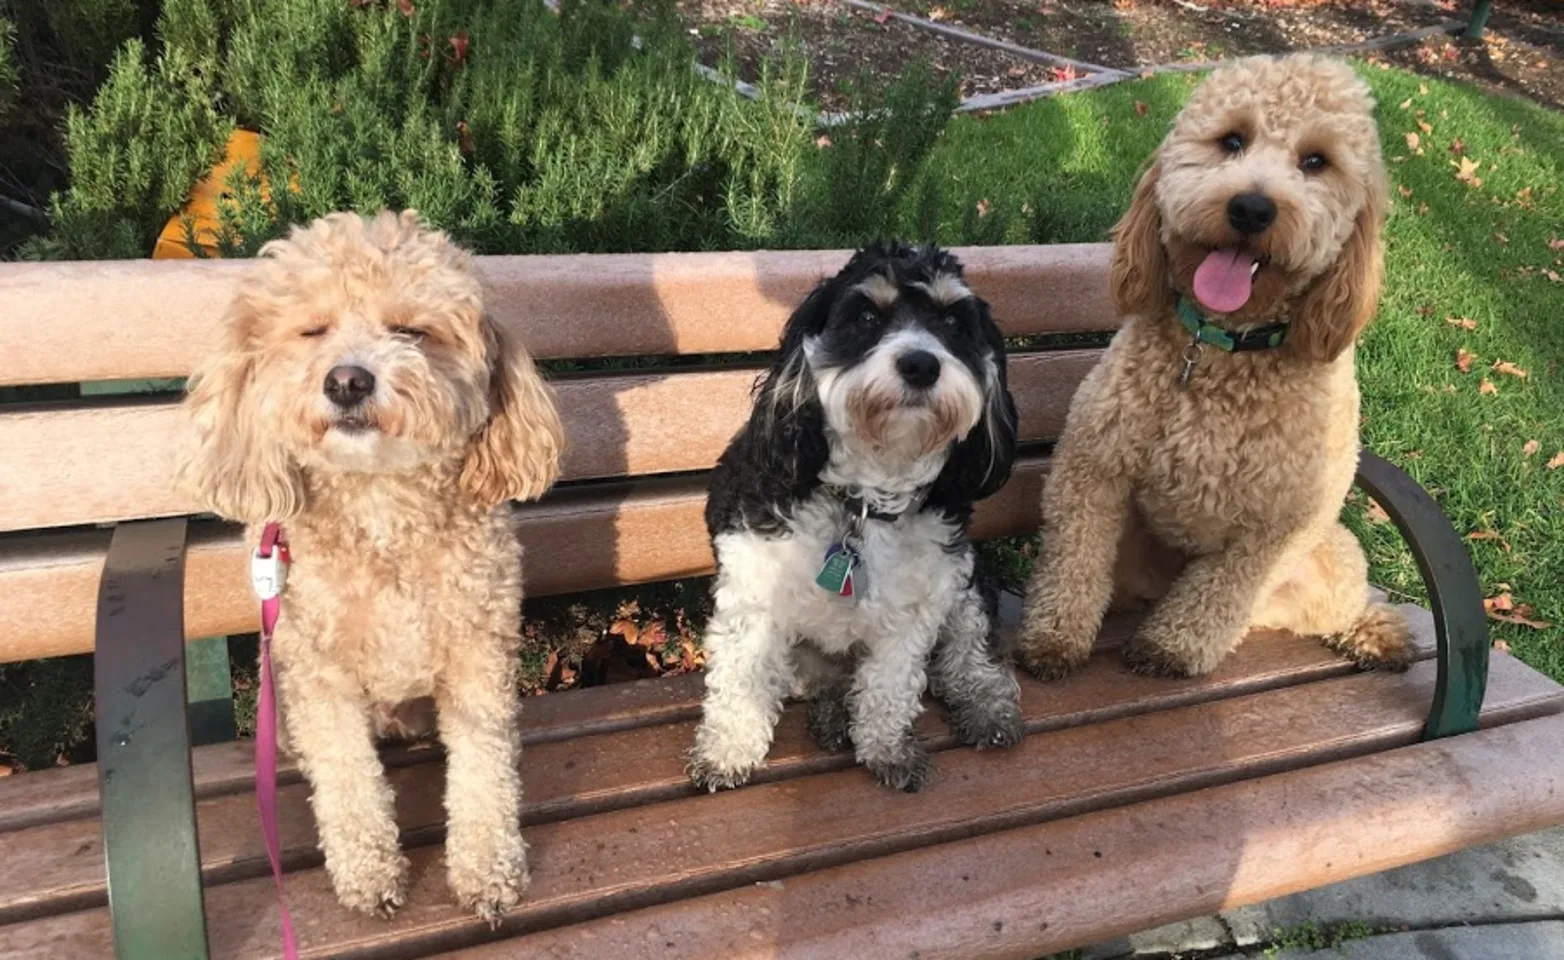 Dogs on benches